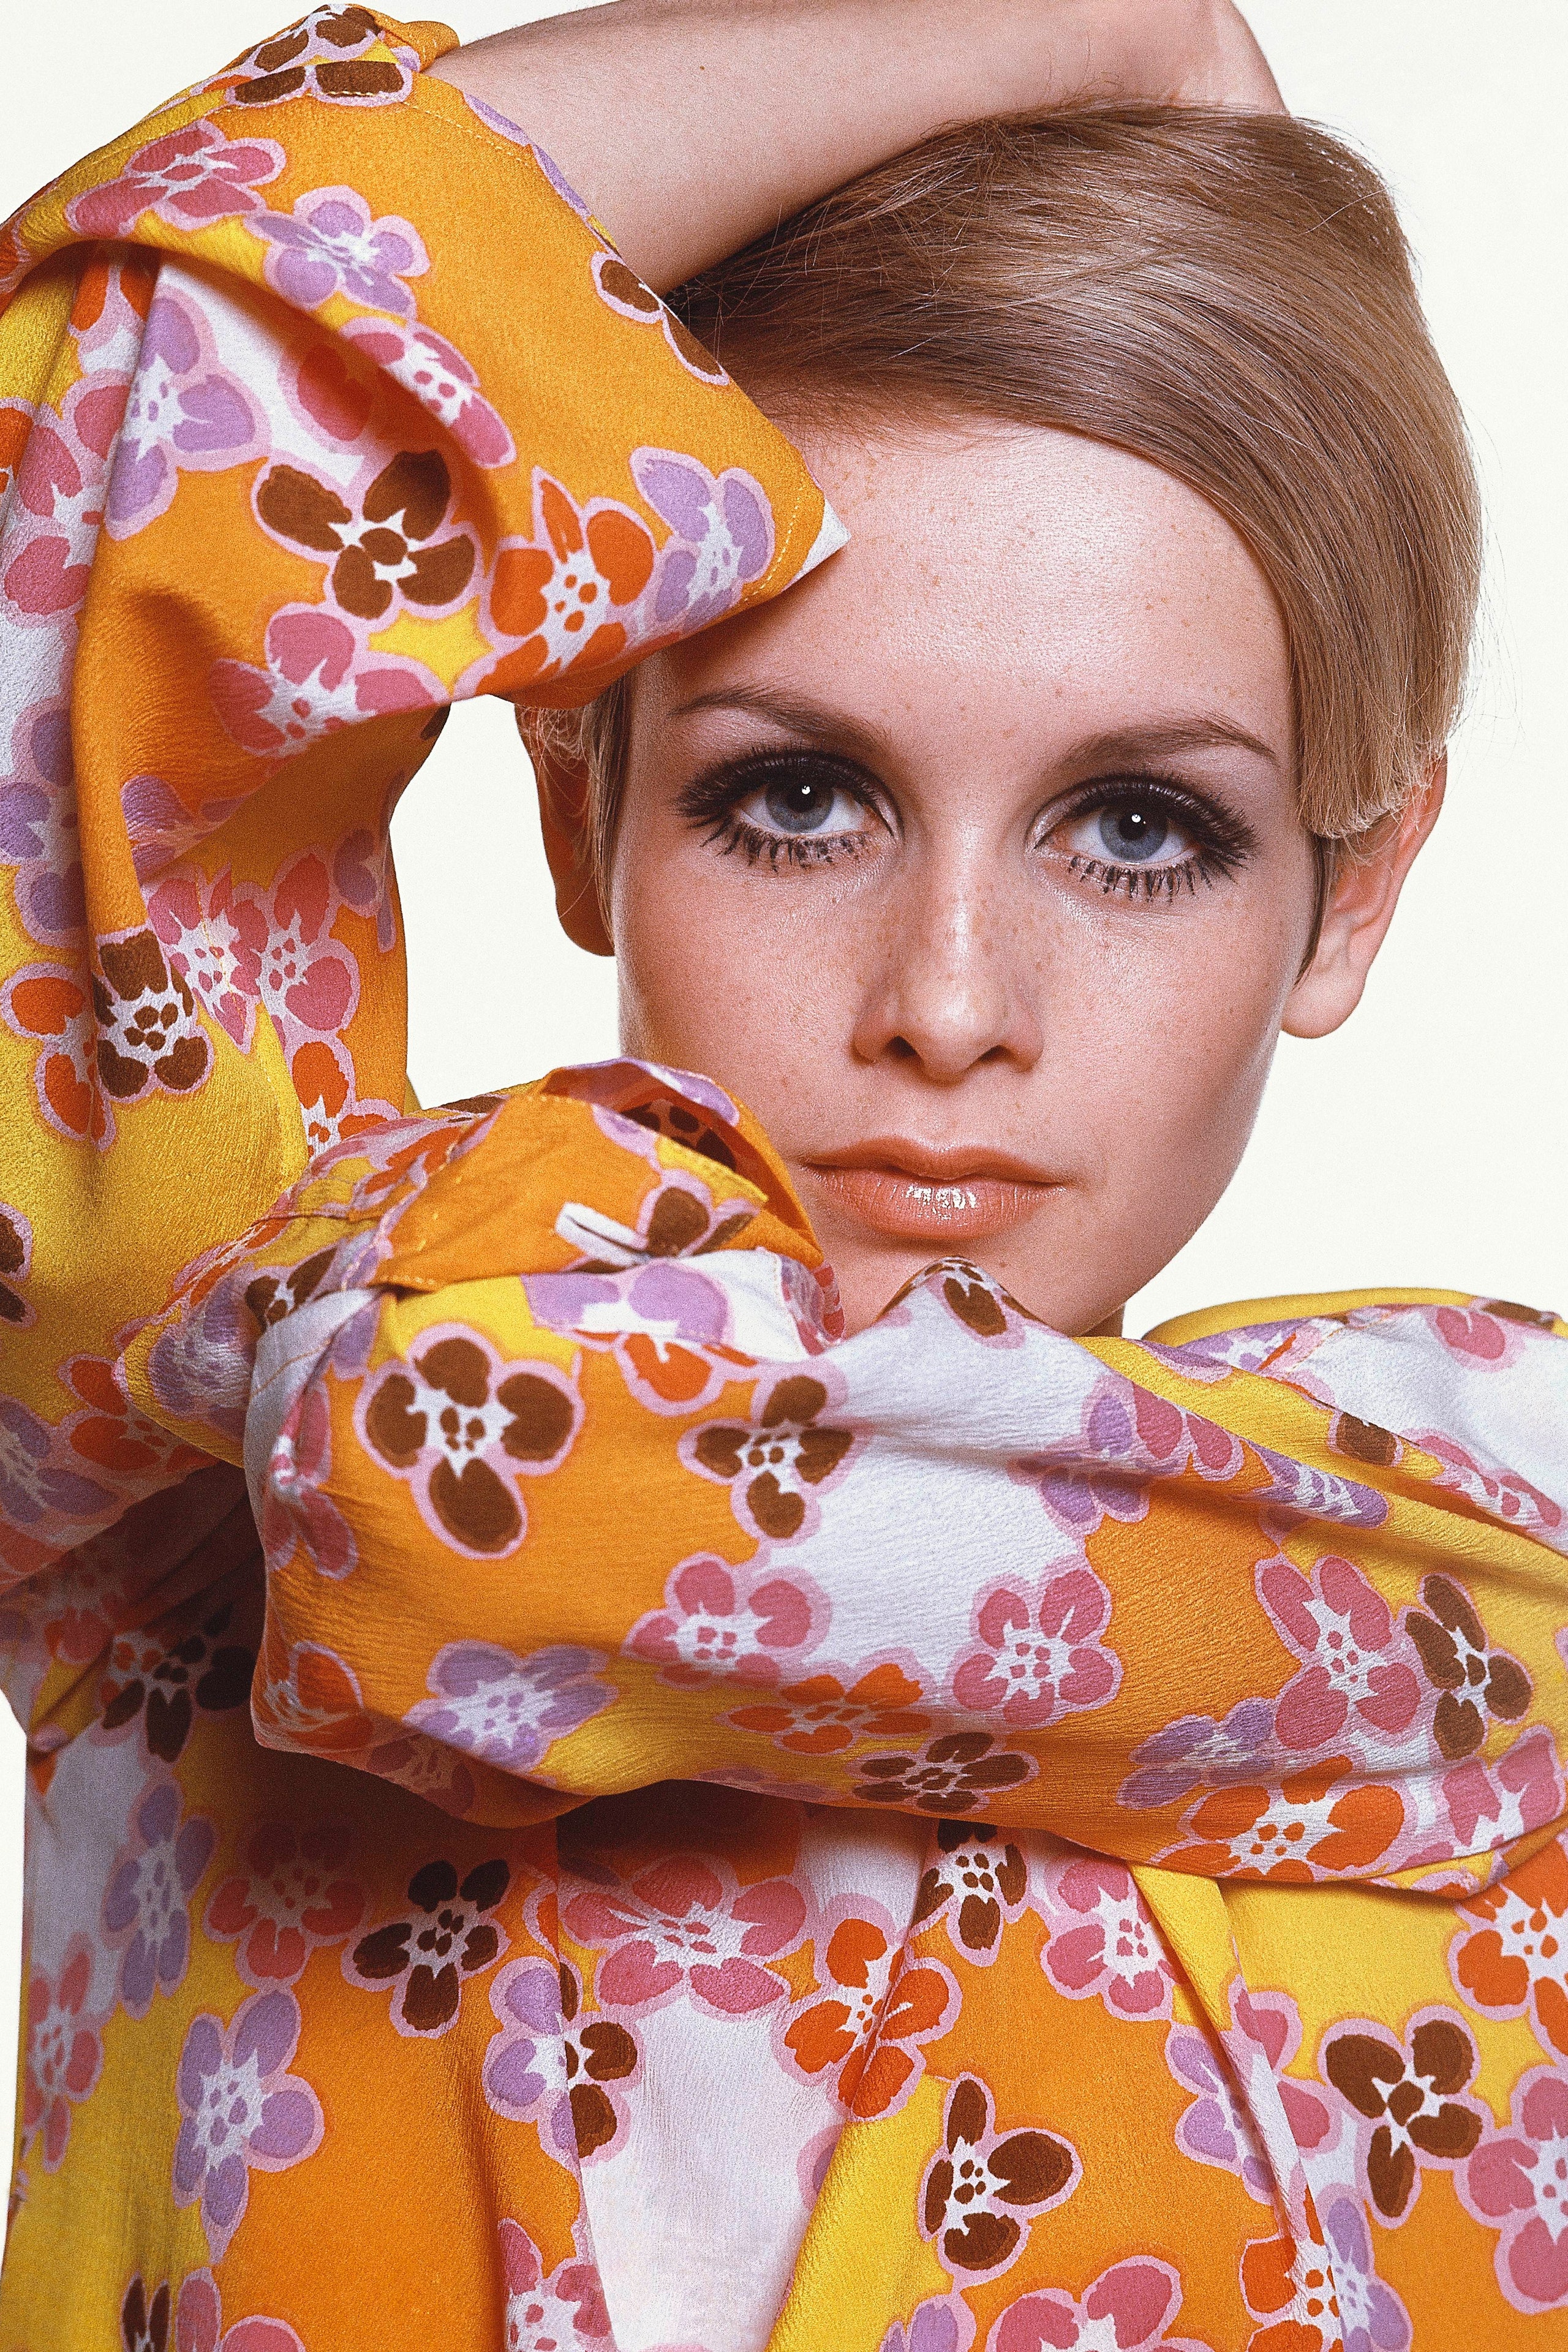 Twiggy in Max Factor makeup wearing flowered crepe dress by Michele Rosier.